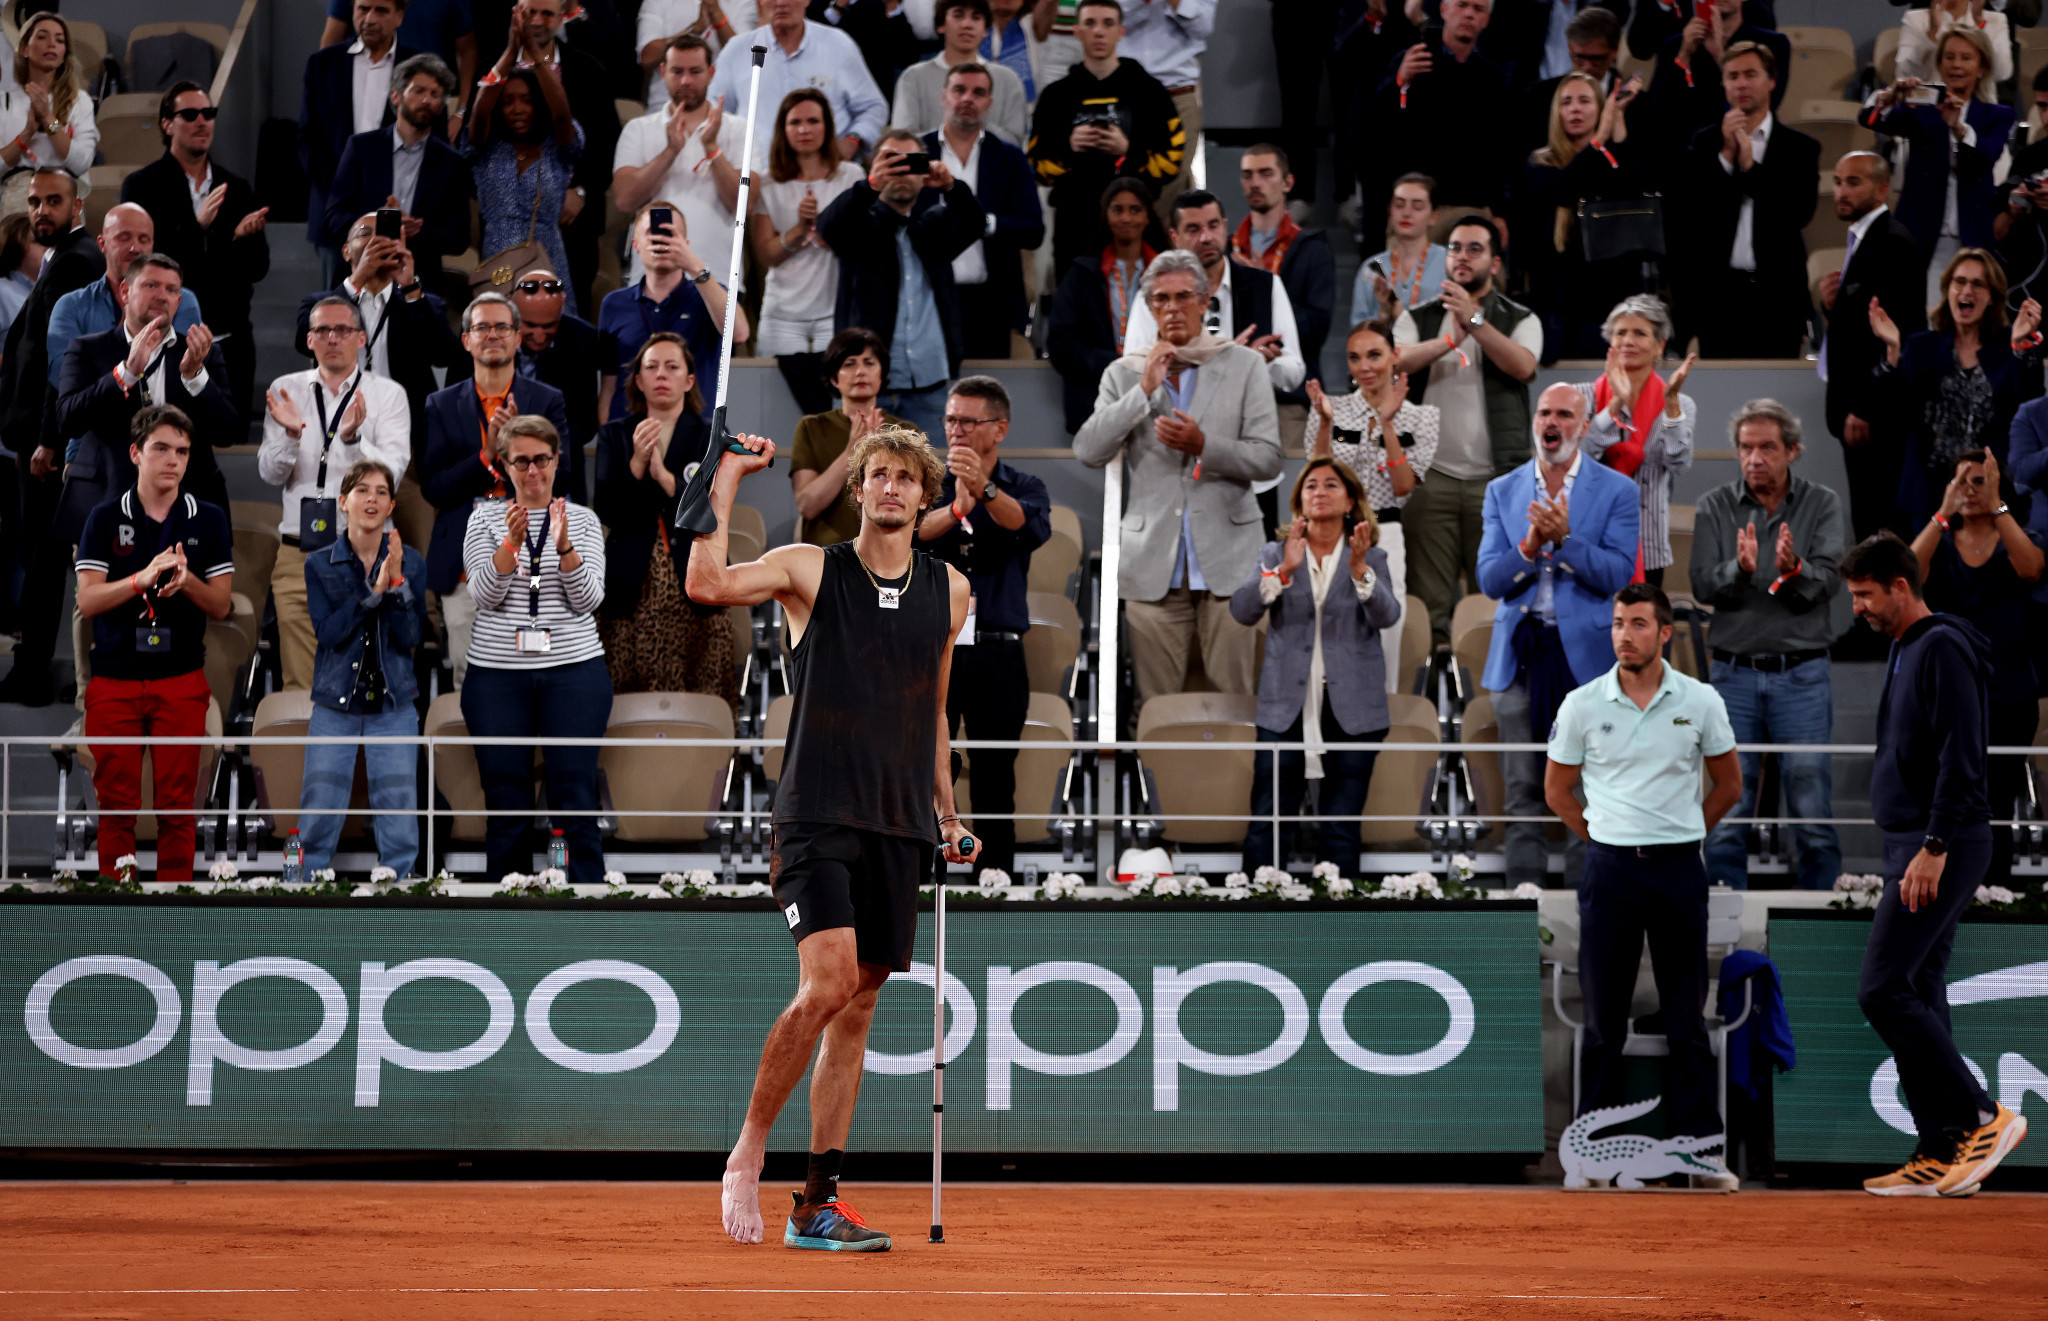 Alexander Zverev, on crutches, waves to the fans before leaving the court ©Getty Images